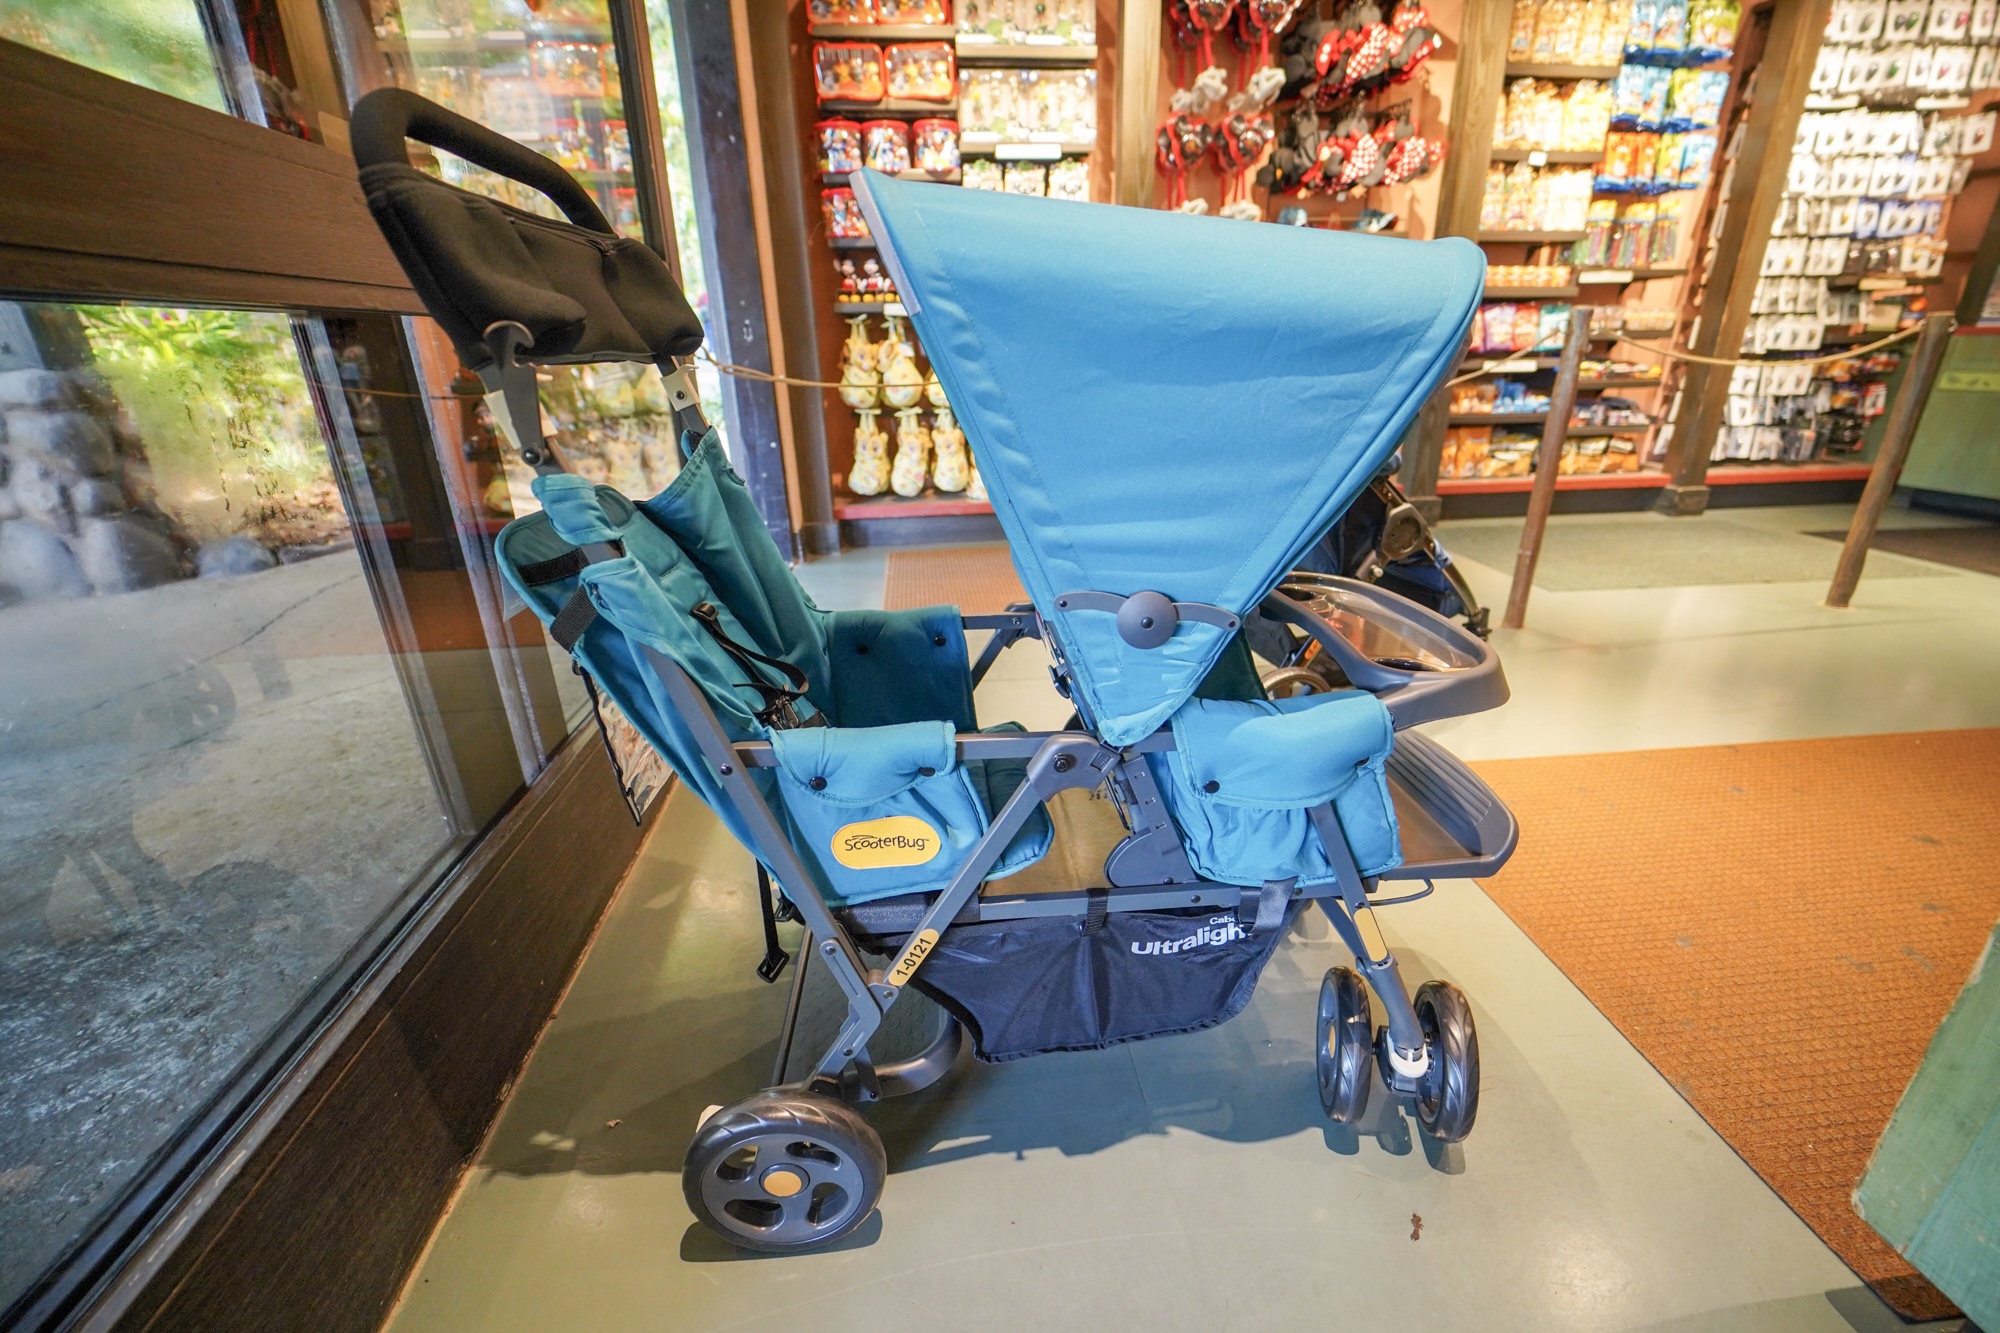 Two New Stroller Models Now Available for Rental at Disney